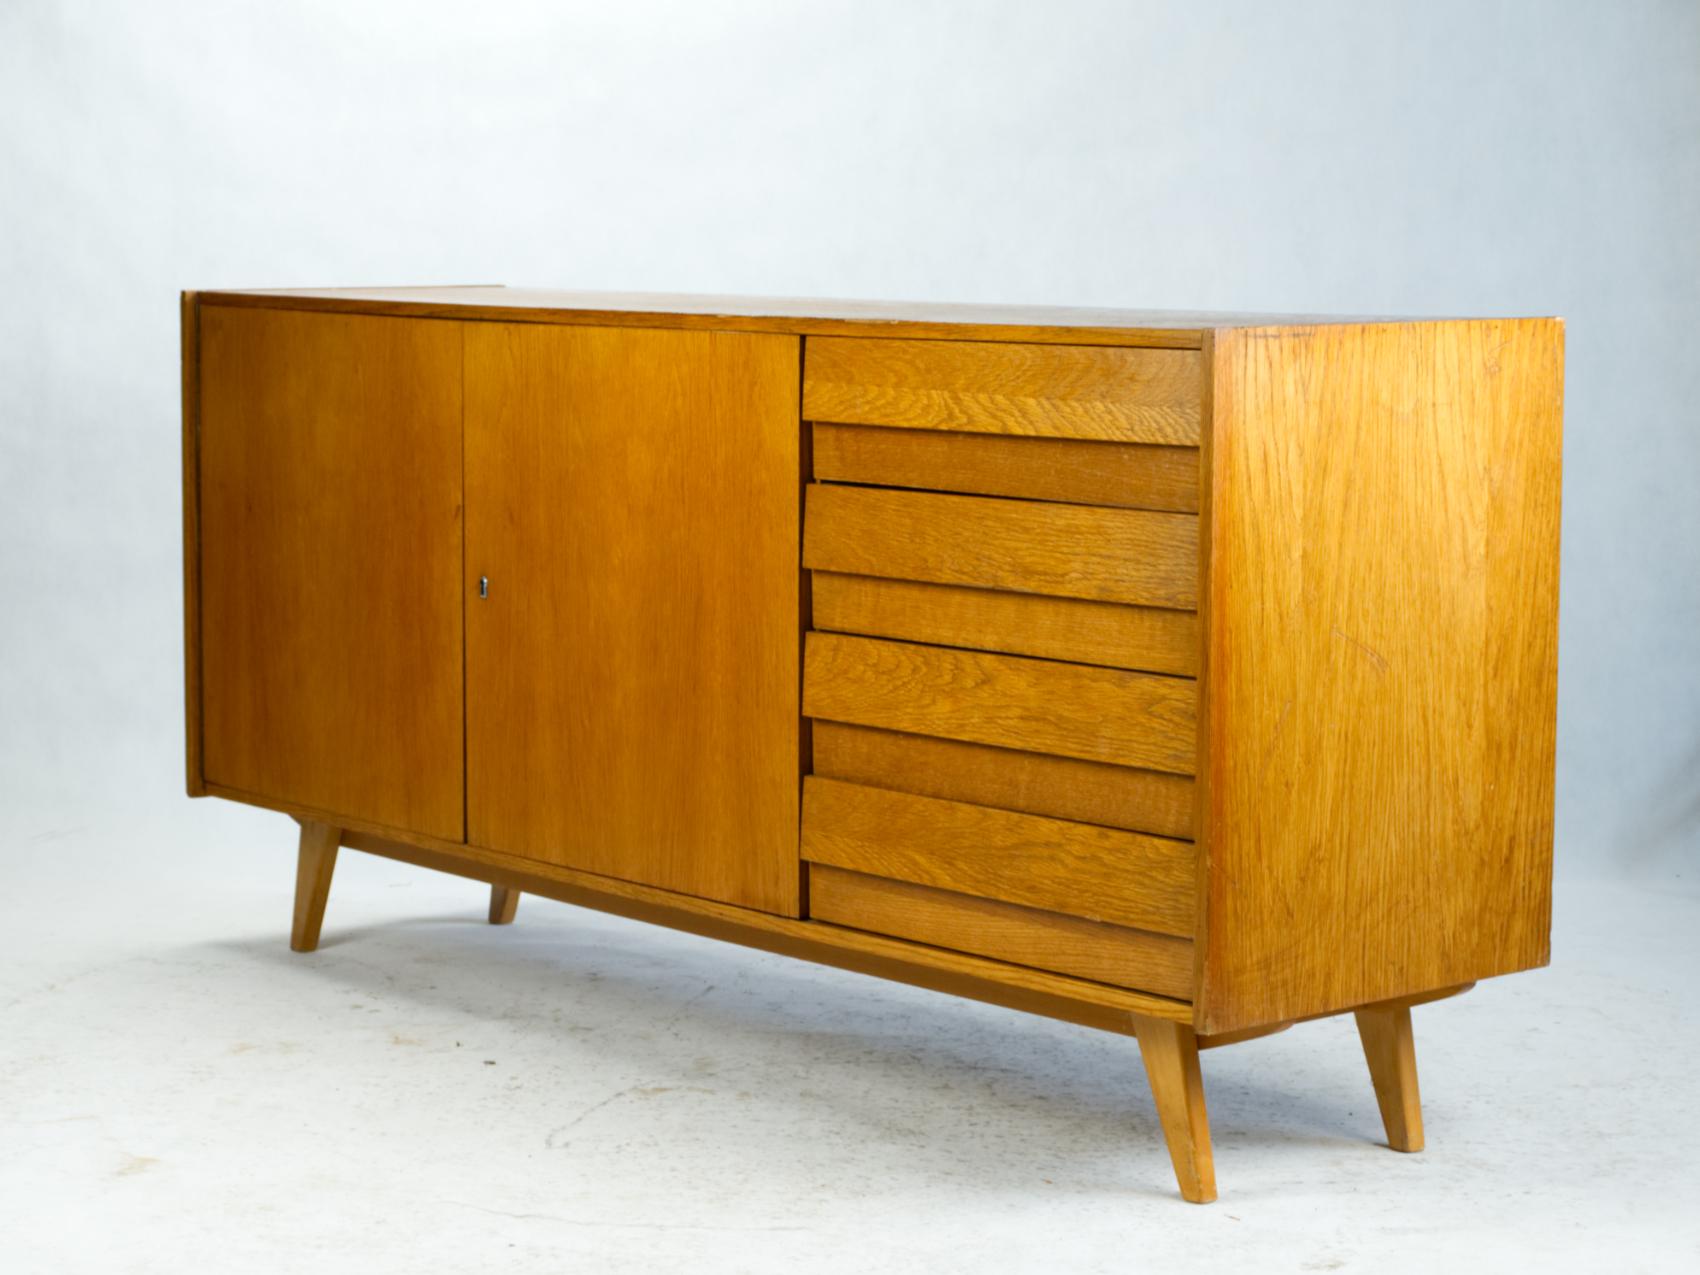 A wide cabinet designed by the Czech designer Jirí Jiroutek as a part of the famous series U-450 for the national enterprise Interior Praha. He began to work on U-450 series right after the ´58 Expo exhibition in Brussels. The success of the Czech